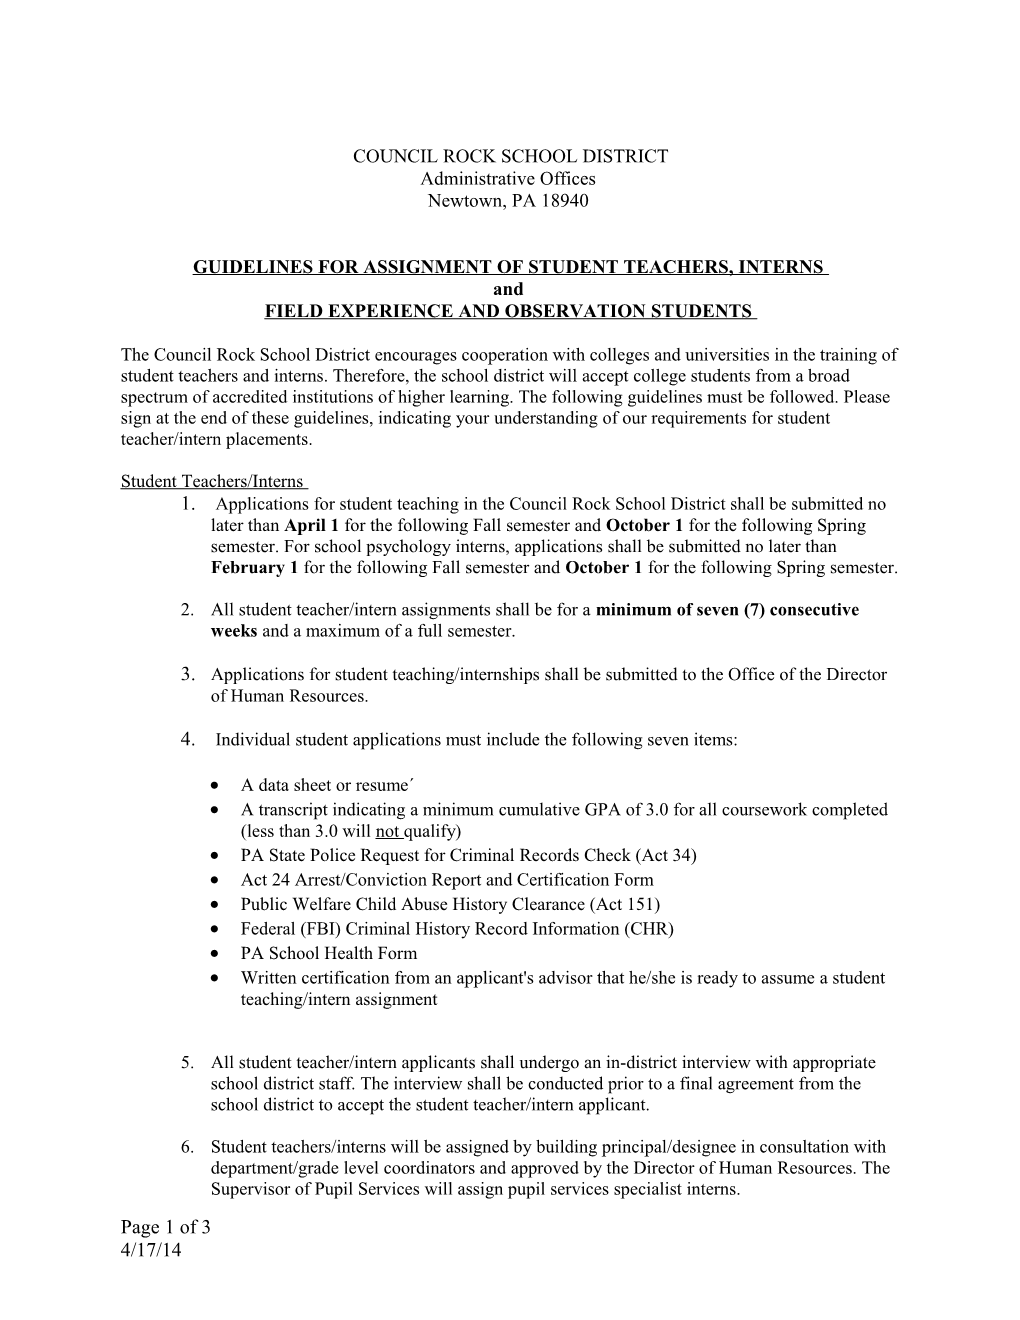 Guidelines for Assignment of Student Teachers, Interns